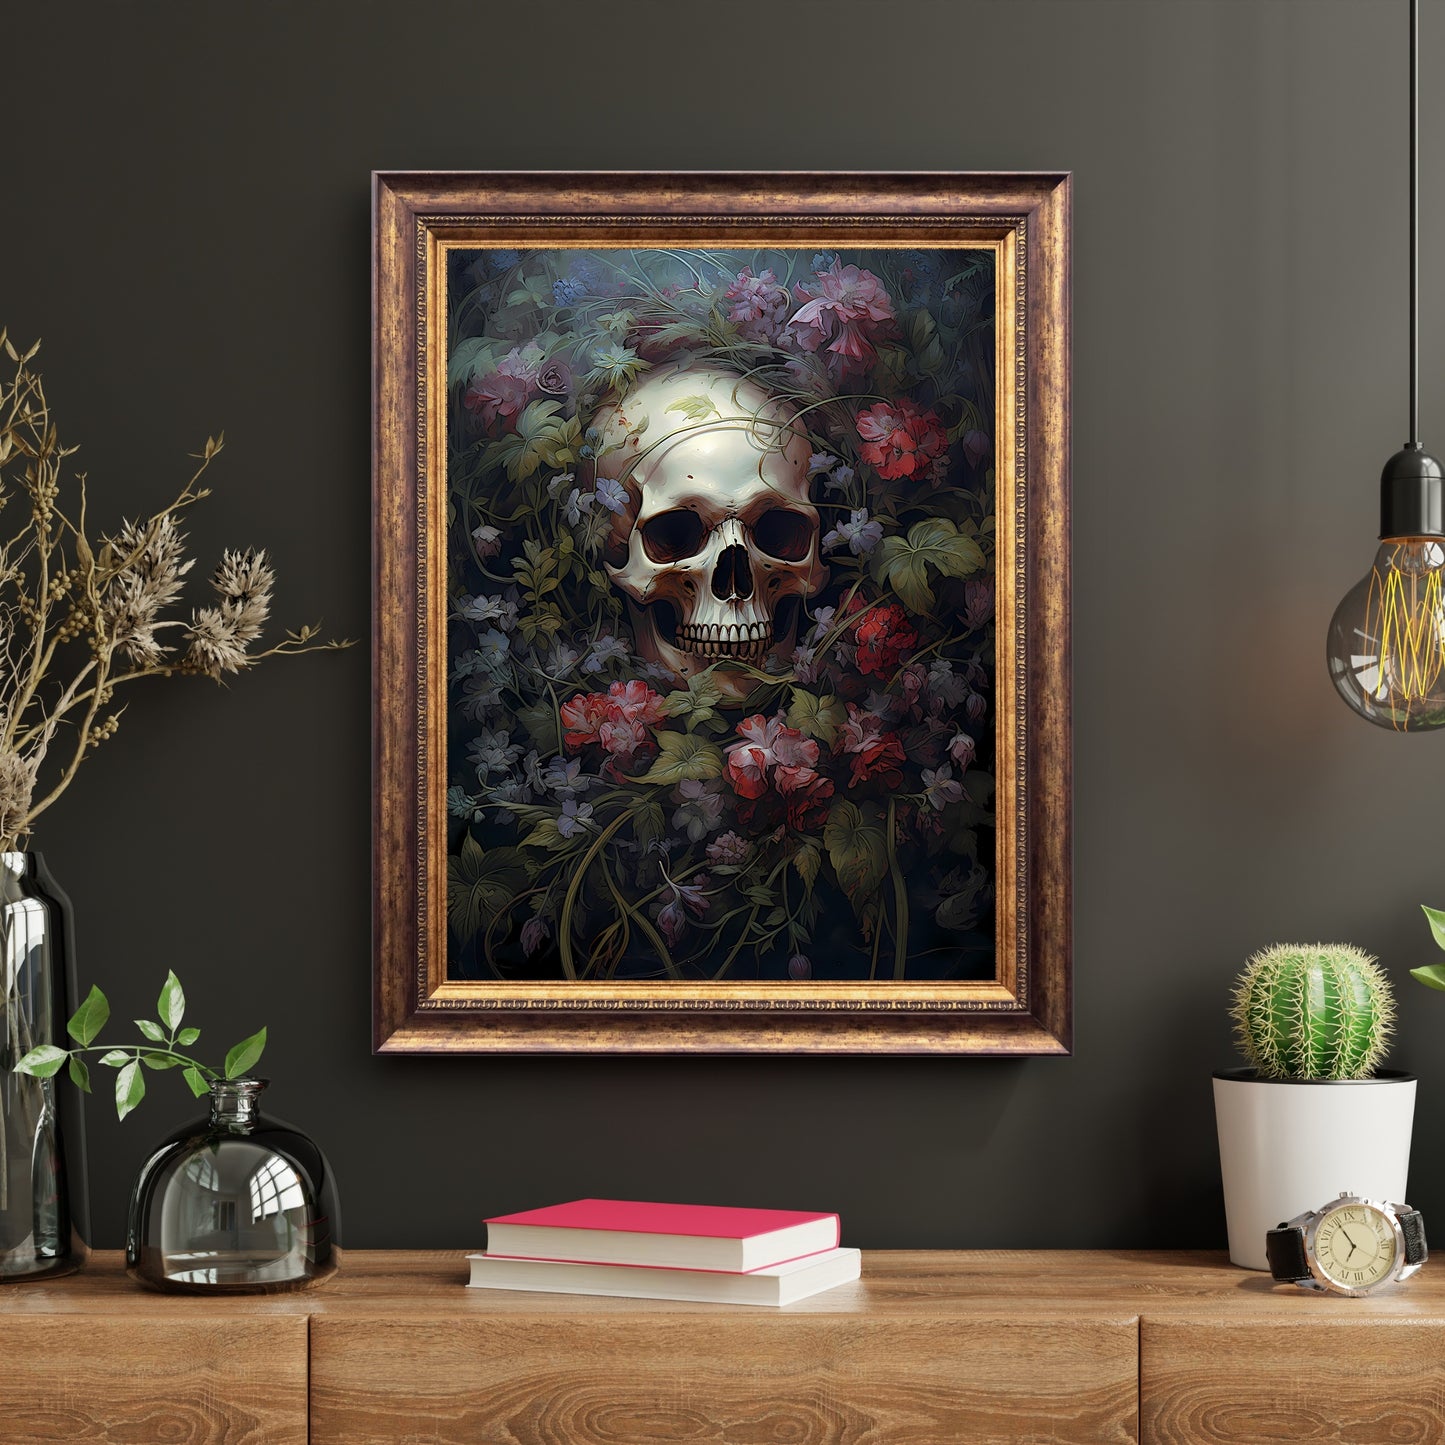 Skull lying in a Bed of Flowers Paper Poster Prints Wall Art Poster, perfect for Decoration of a Dark Room with a witchy nostalgic touch.